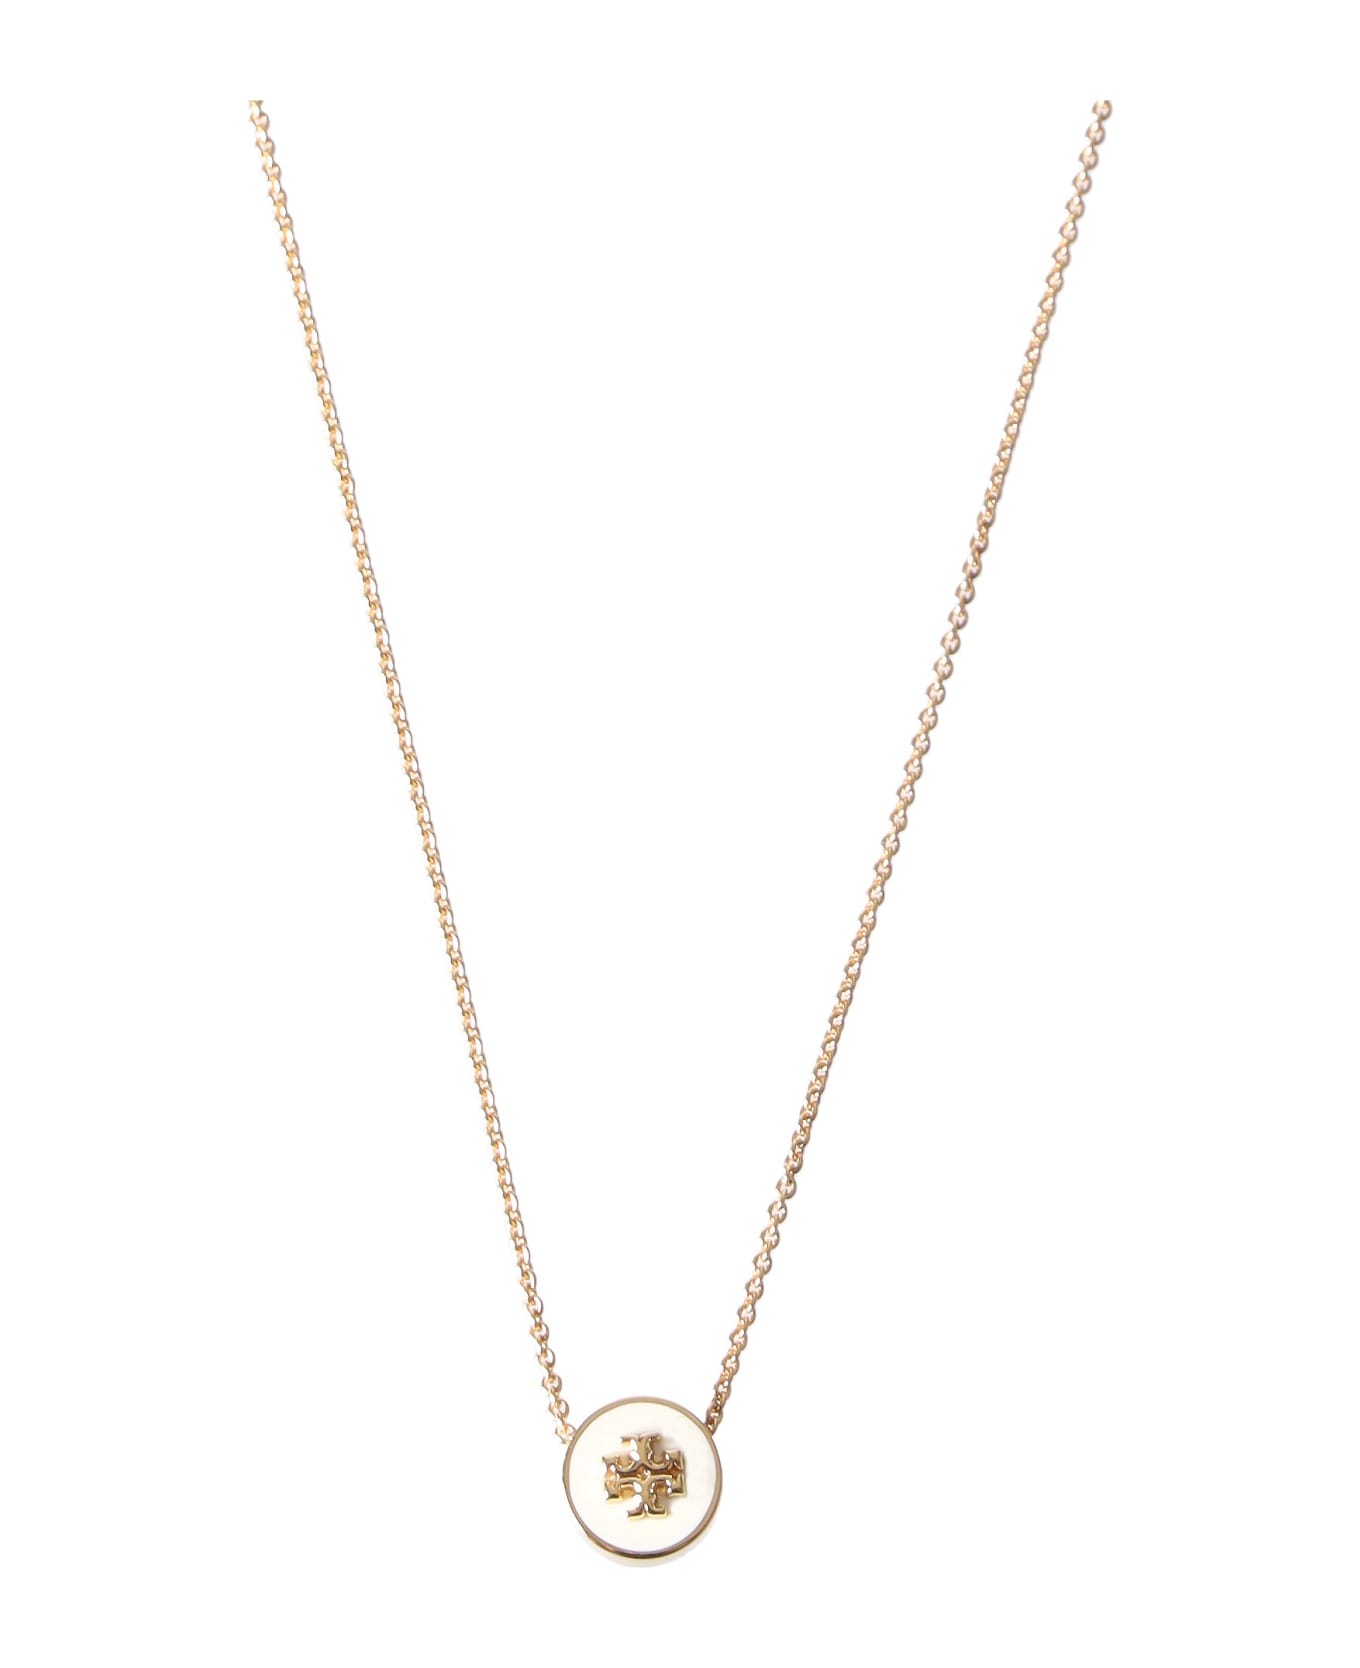 Tory Burch Necklace With Logo Pendant - Gold